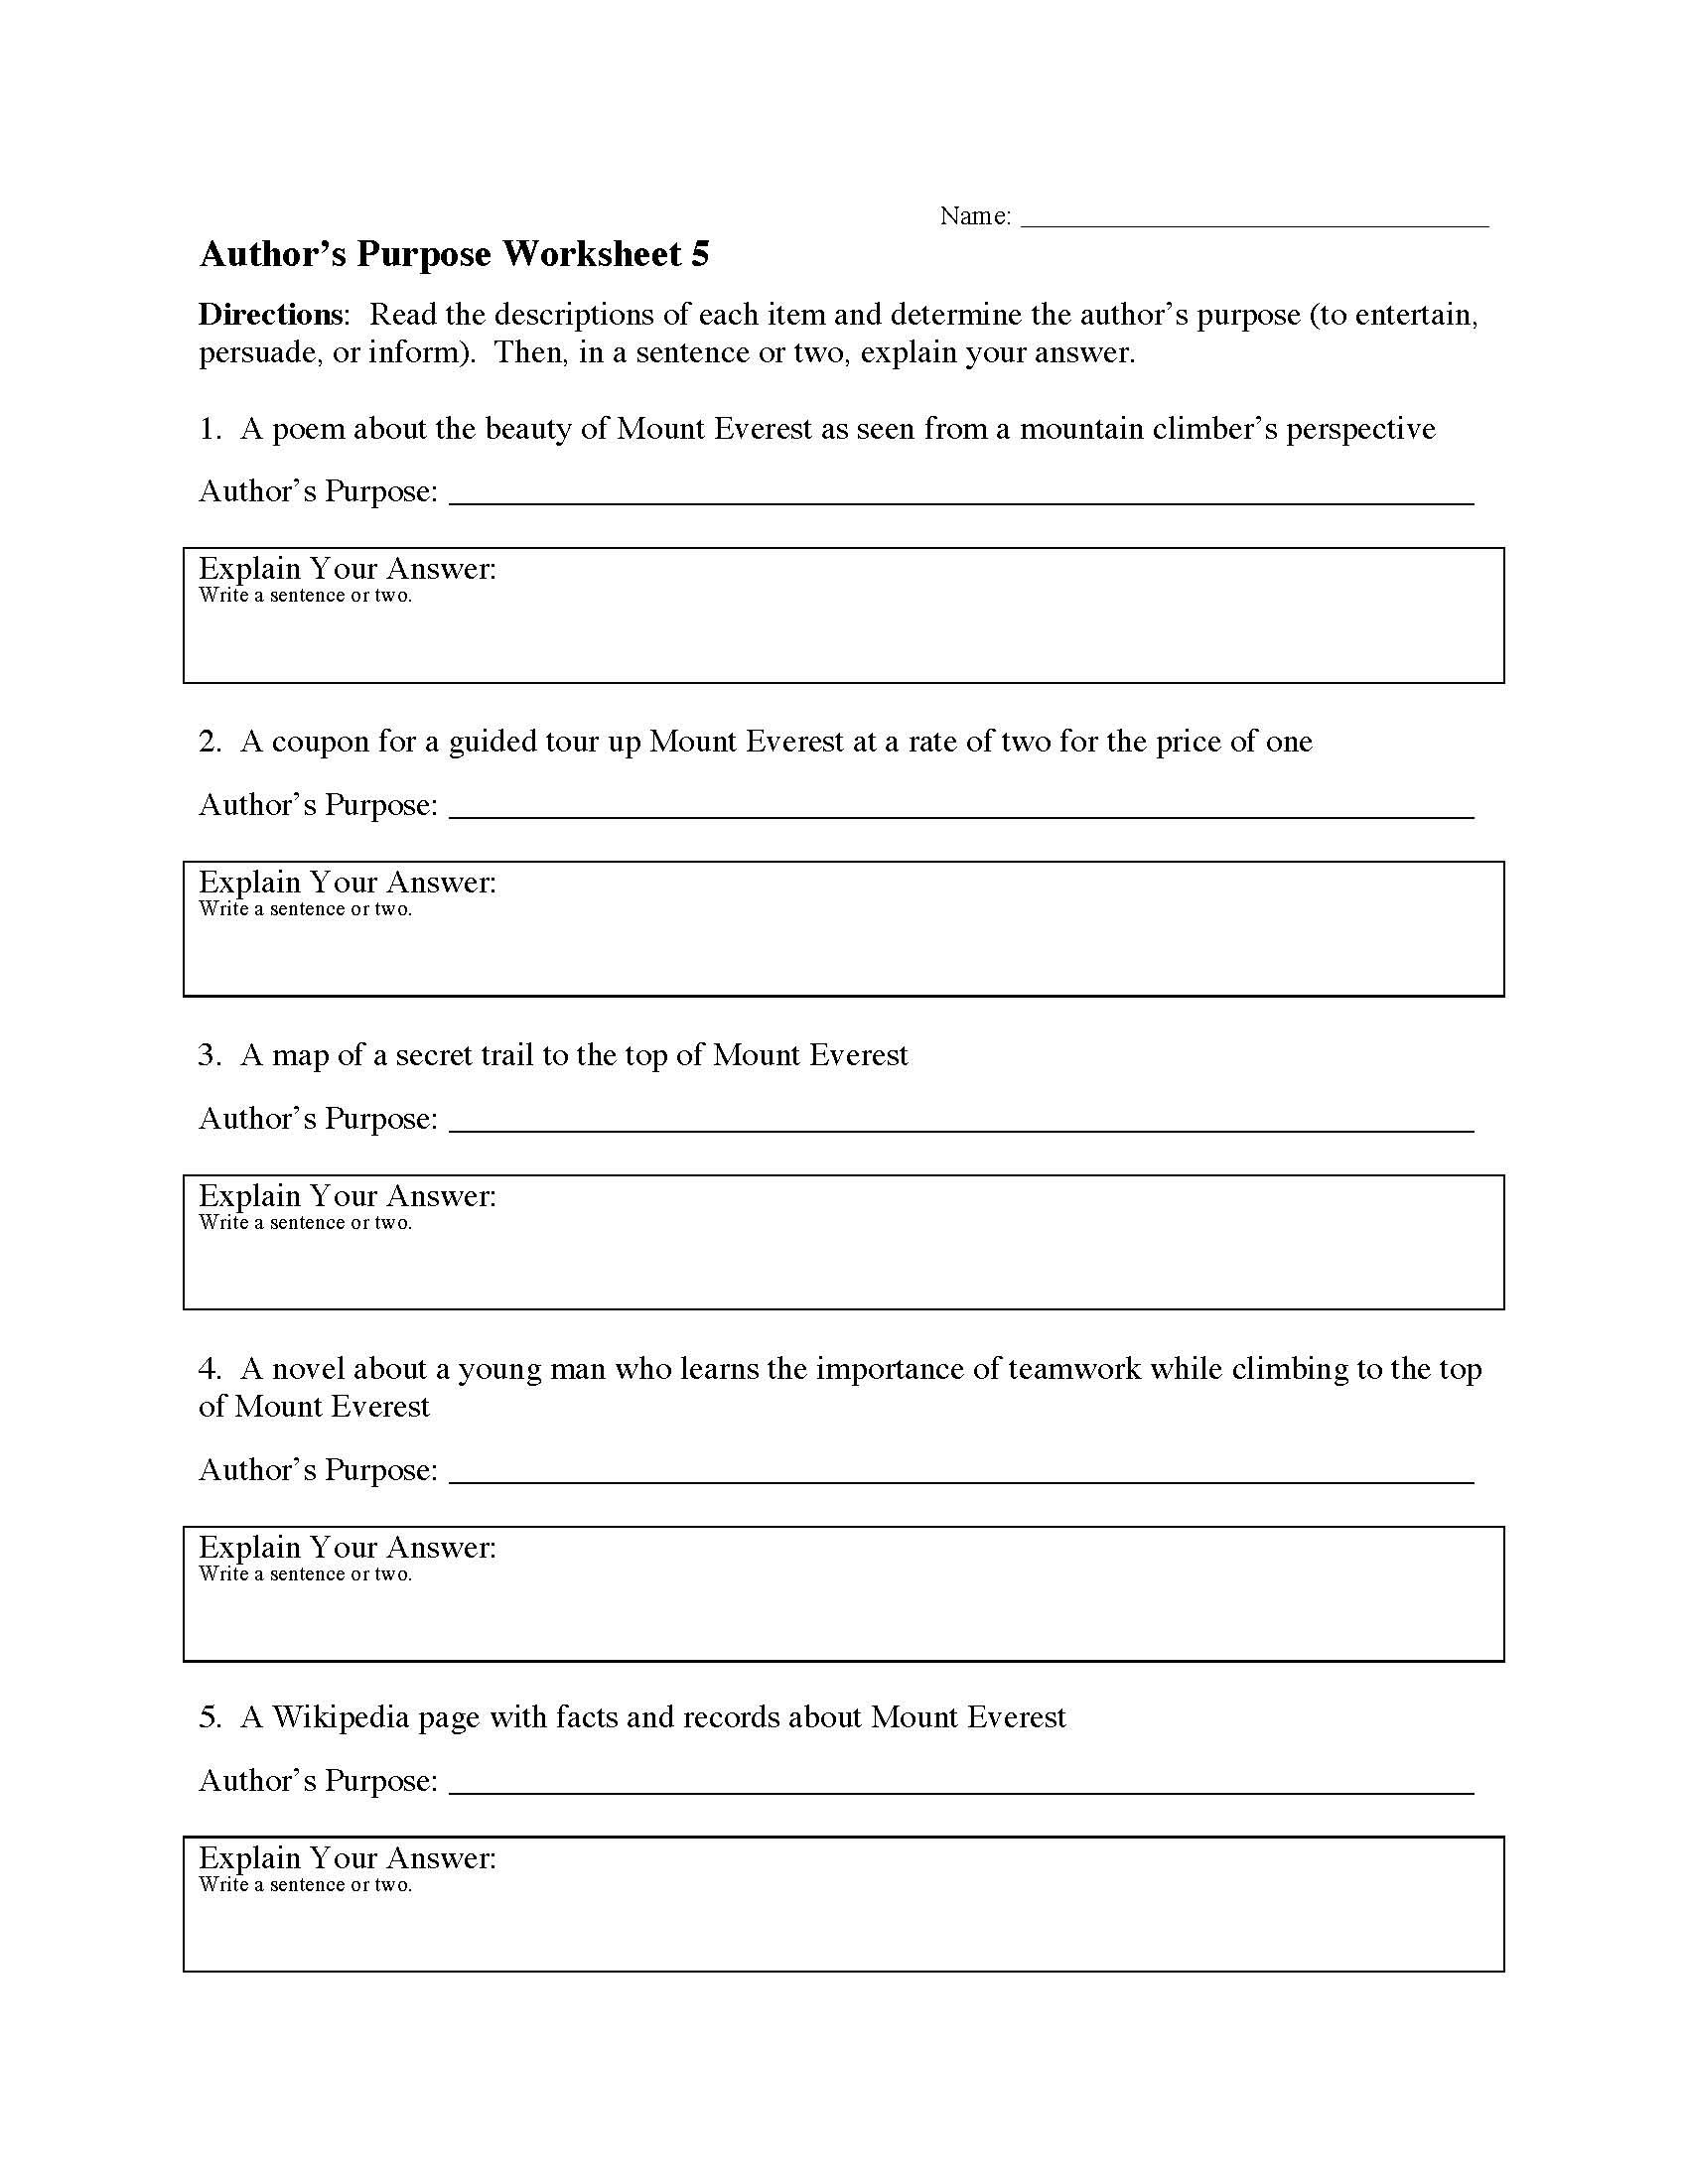 This is a preview image of Author's Purpose Worksheet 5. Click on it to enlarge it or view the source file.